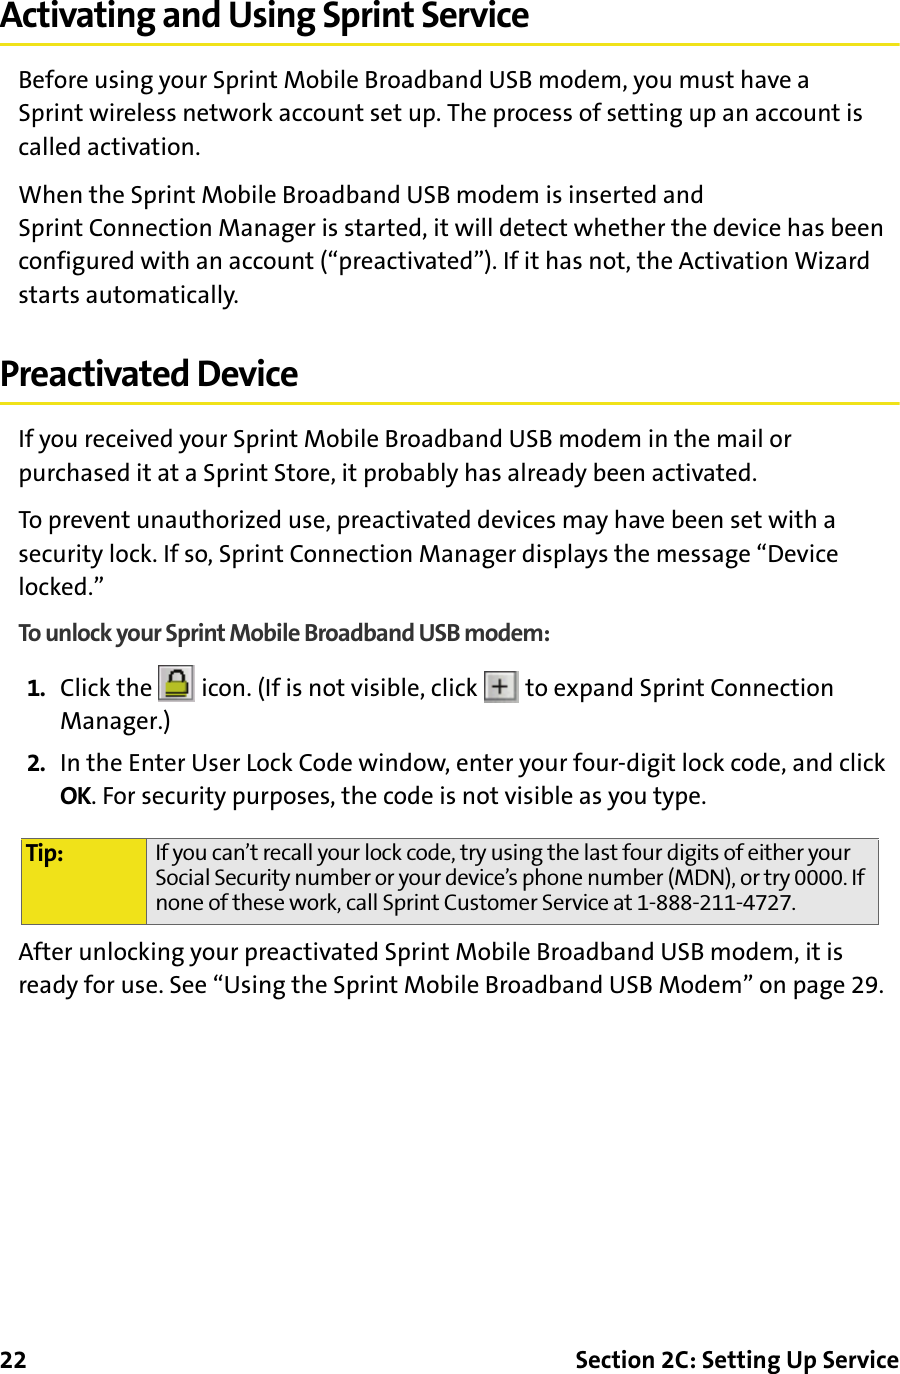 22 Section 2C: Setting Up ServiceActivating and Using Sprint ServiceBefore using your Sprint Mobile Broadband USB modem, you must have a Sprint wireless network account set up. The process of setting up an account is called activation.When the Sprint Mobile Broadband USB modem is inserted and Sprint Connection Manager is started, it will detect whether the device has been configured with an account (“preactivated”). If it has not, the Activation Wizard starts automatically.Preactivated DeviceIf you received your Sprint Mobile Broadband USB modem in the mail or purchased it at a Sprint Store, it probably has already been activated.To prevent unauthorized use, preactivated devices may have been set with a security lock. If so, Sprint Connection Manager displays the message “Device locked.”To unlock your Sprint Mobile Broadband USB modem:1. Click the   icon. (If is not visible, click   to expand Sprint Connection Manager.)2. In the Enter User Lock Code window, enter your four-digit lock code, and click OK. For security purposes, the code is not visible as you type.After unlocking your preactivated Sprint Mobile Broadband USB modem, it is ready for use. See “Using the Sprint Mobile Broadband USB Modem” on page 29.Tip: If you can’t recall your lock code, try using the last four digits of either your Social Security number or your device’s phone number (MDN), or try 0000. If none of these work, call Sprint Customer Service at 1-888-211-4727.